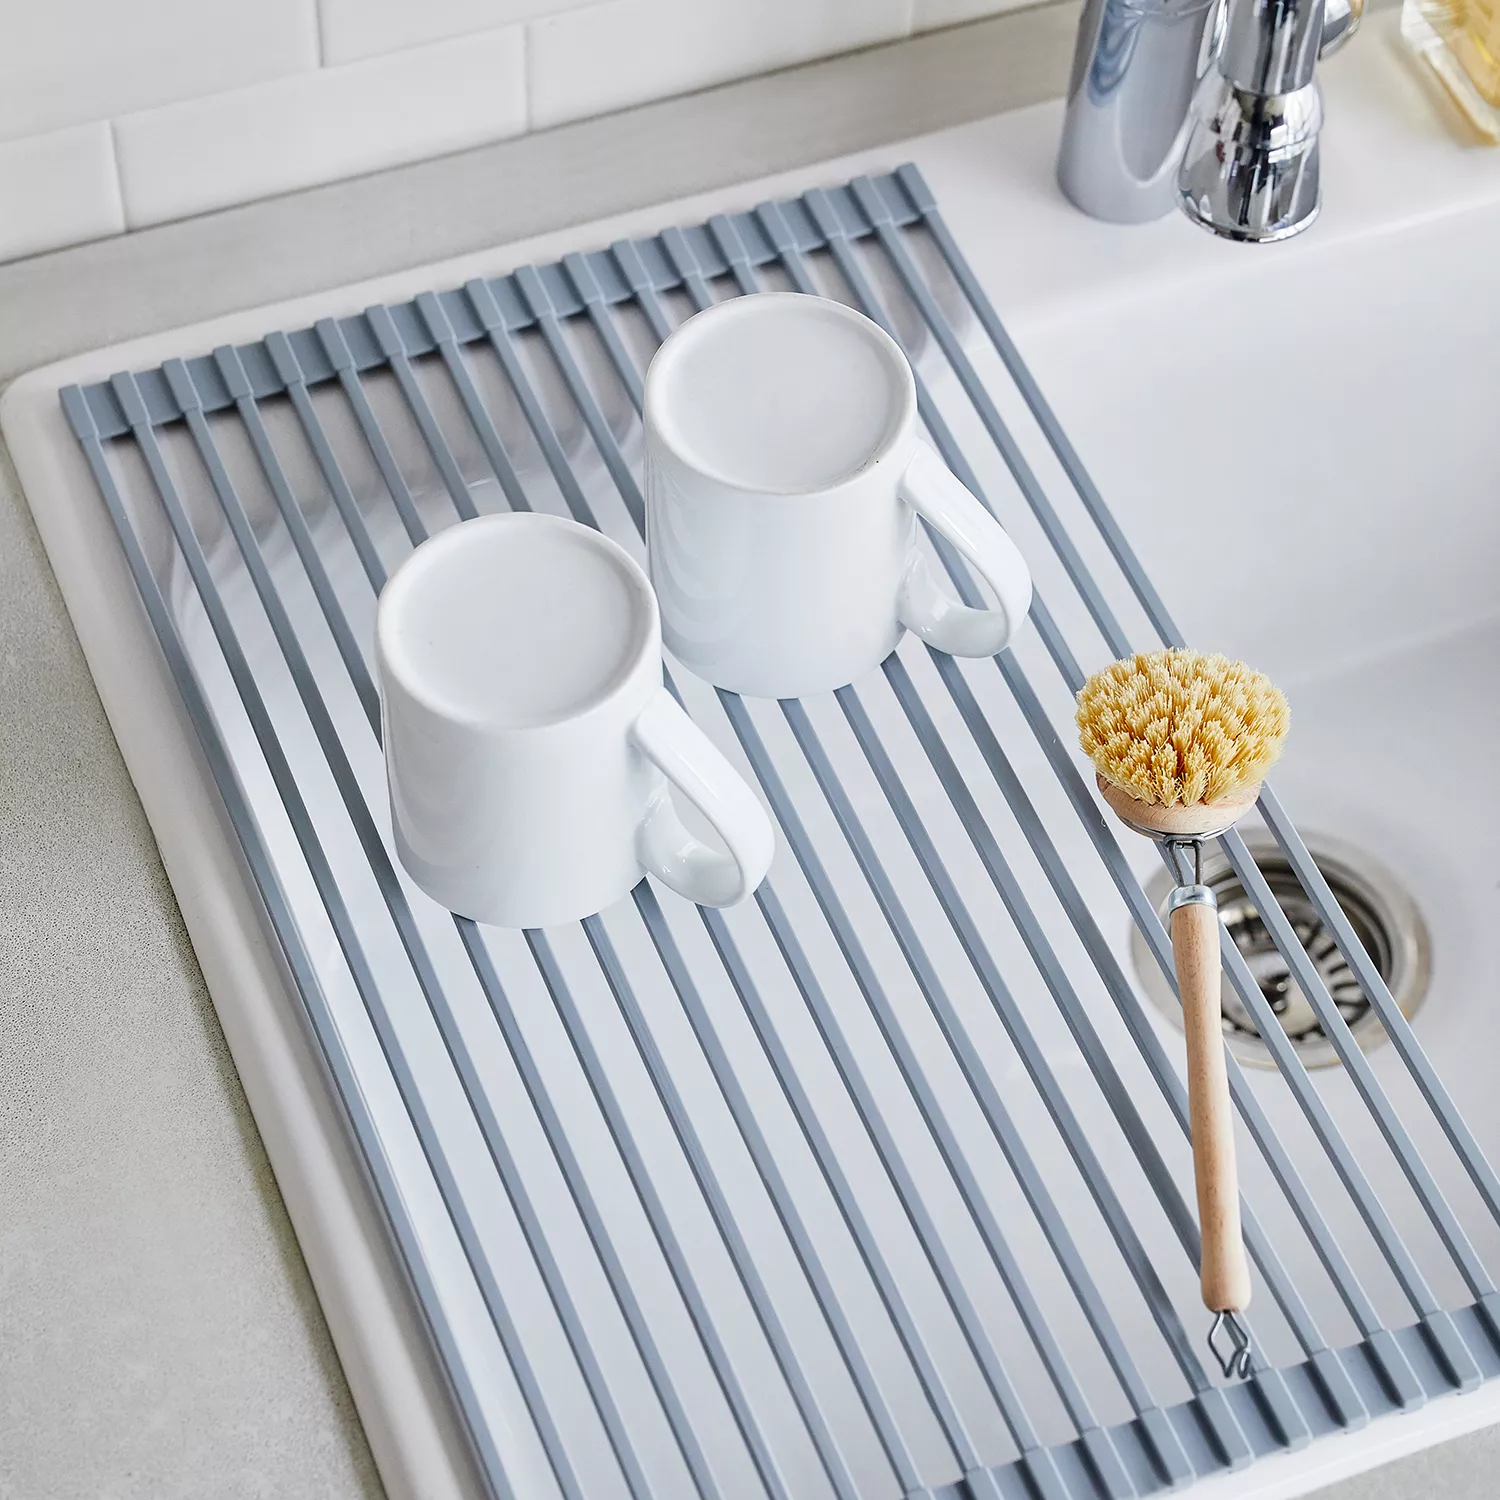 Roll-Up Dish Drying Rack-Over the sink – PJ KITCHEN ACCESSORIES